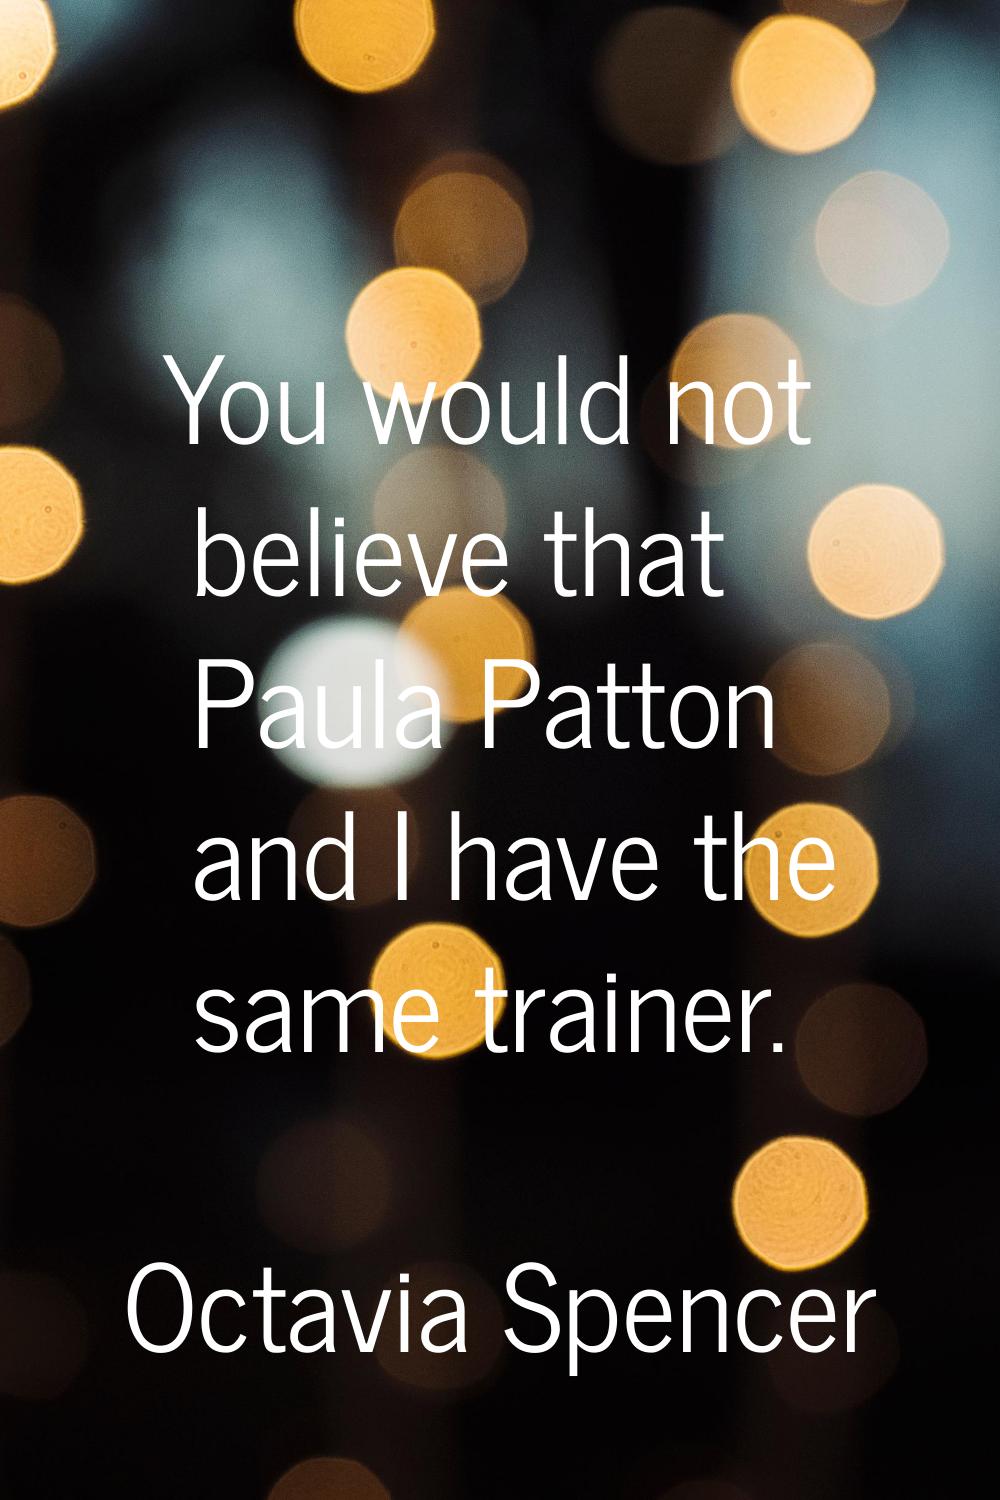 You would not believe that Paula Patton and I have the same trainer.